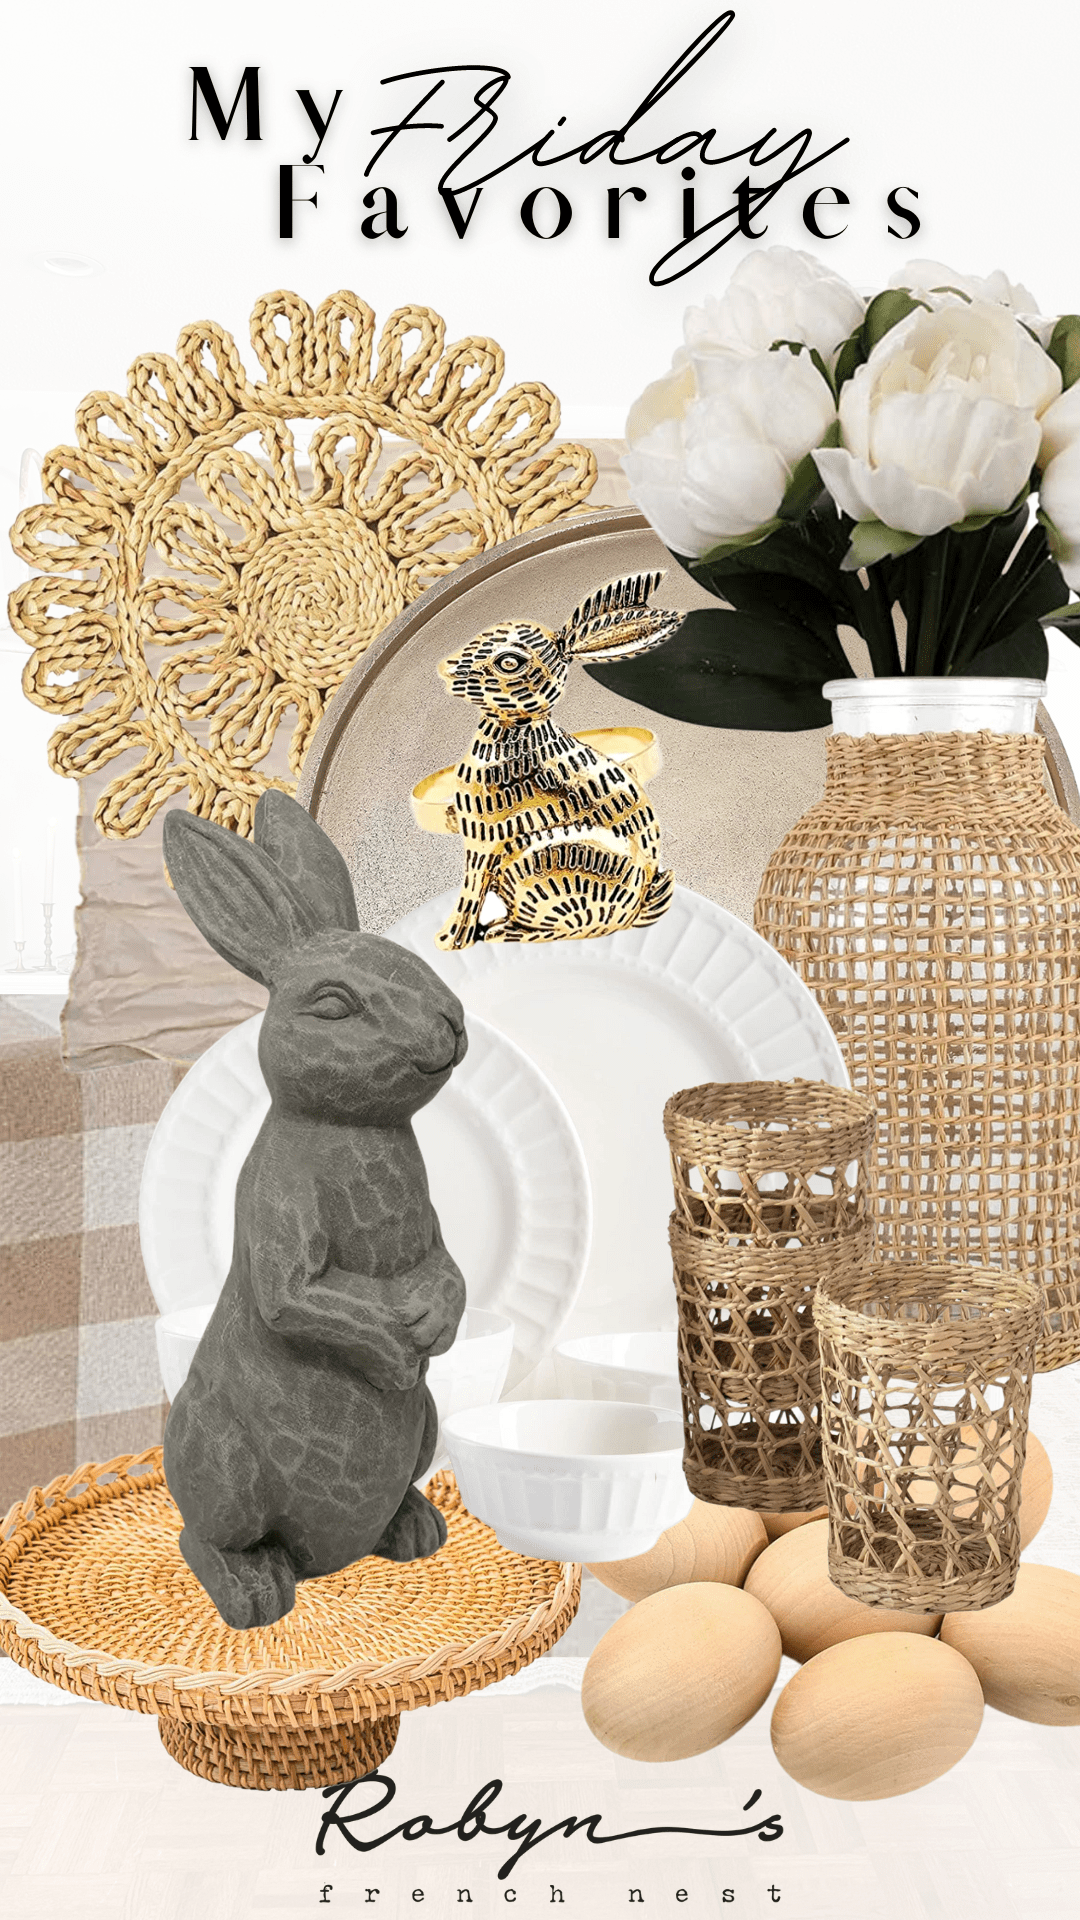 Friday Favorites- Easter Table Decor